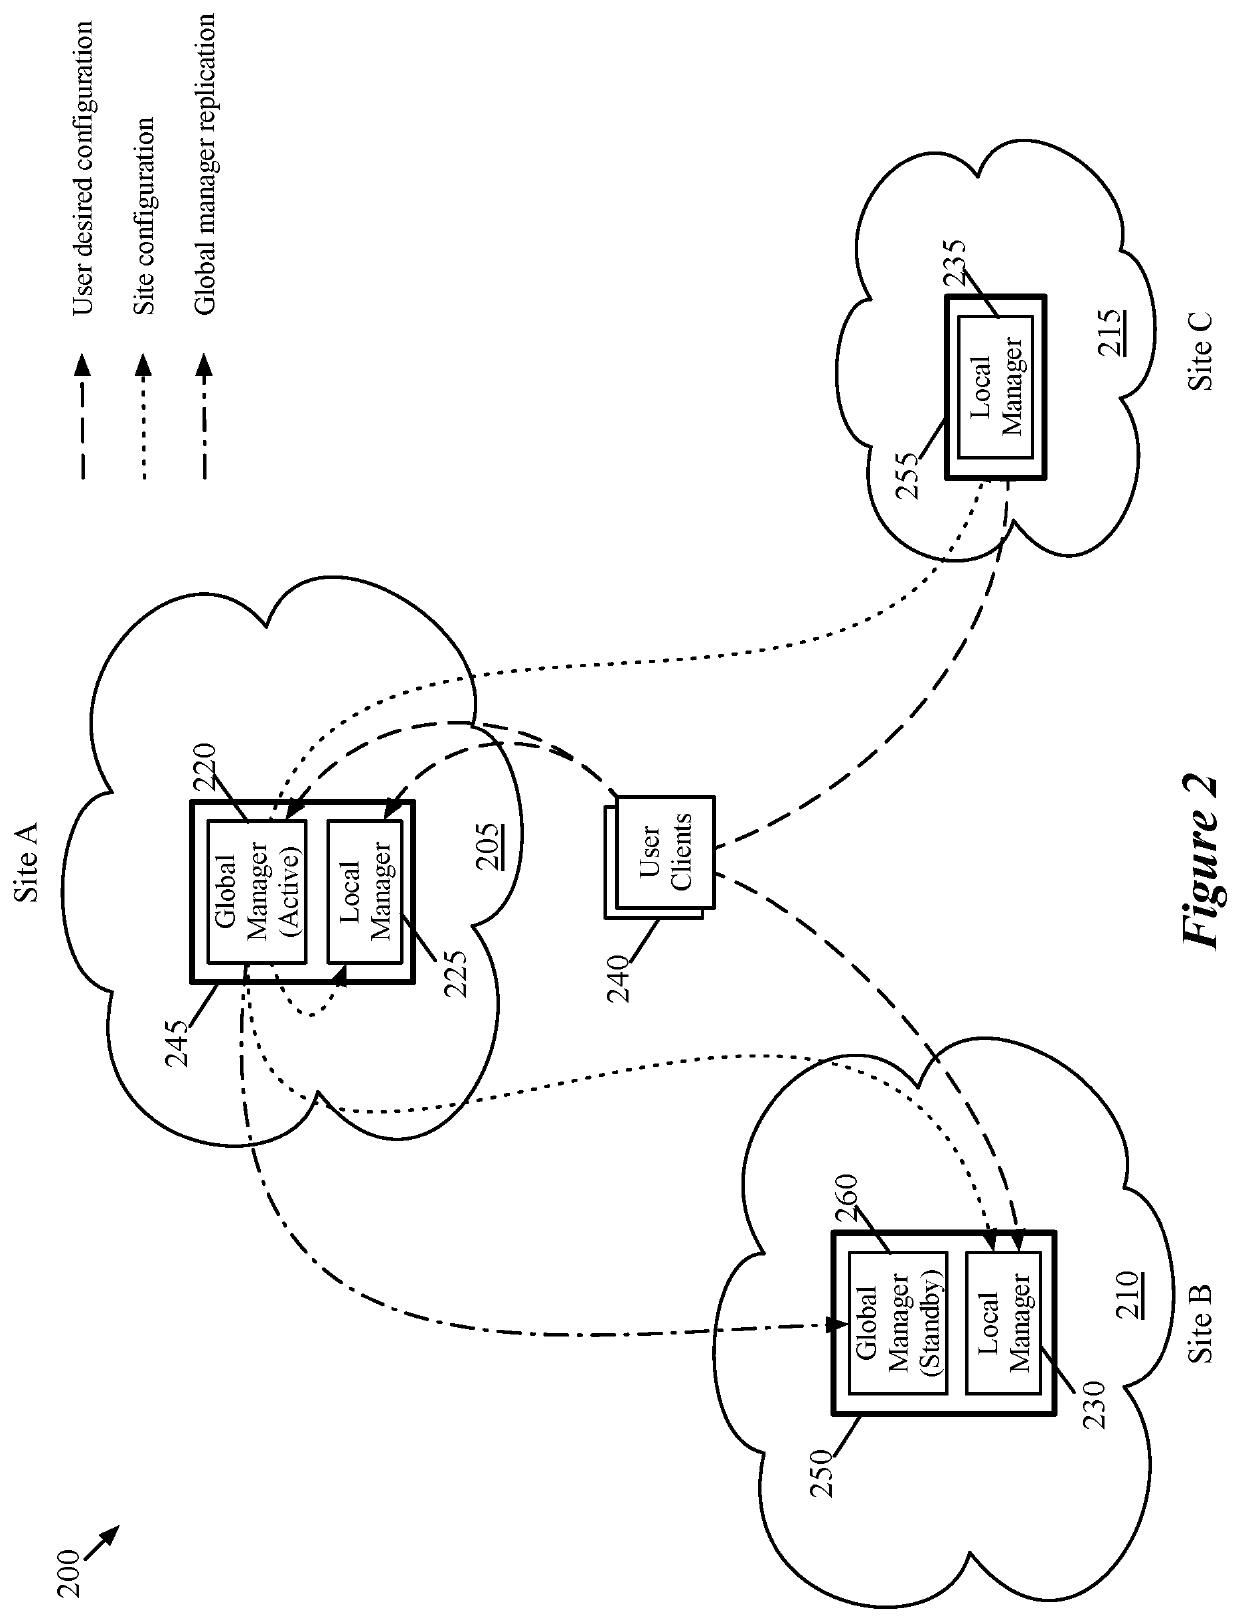 Network controller for multi-site logical network